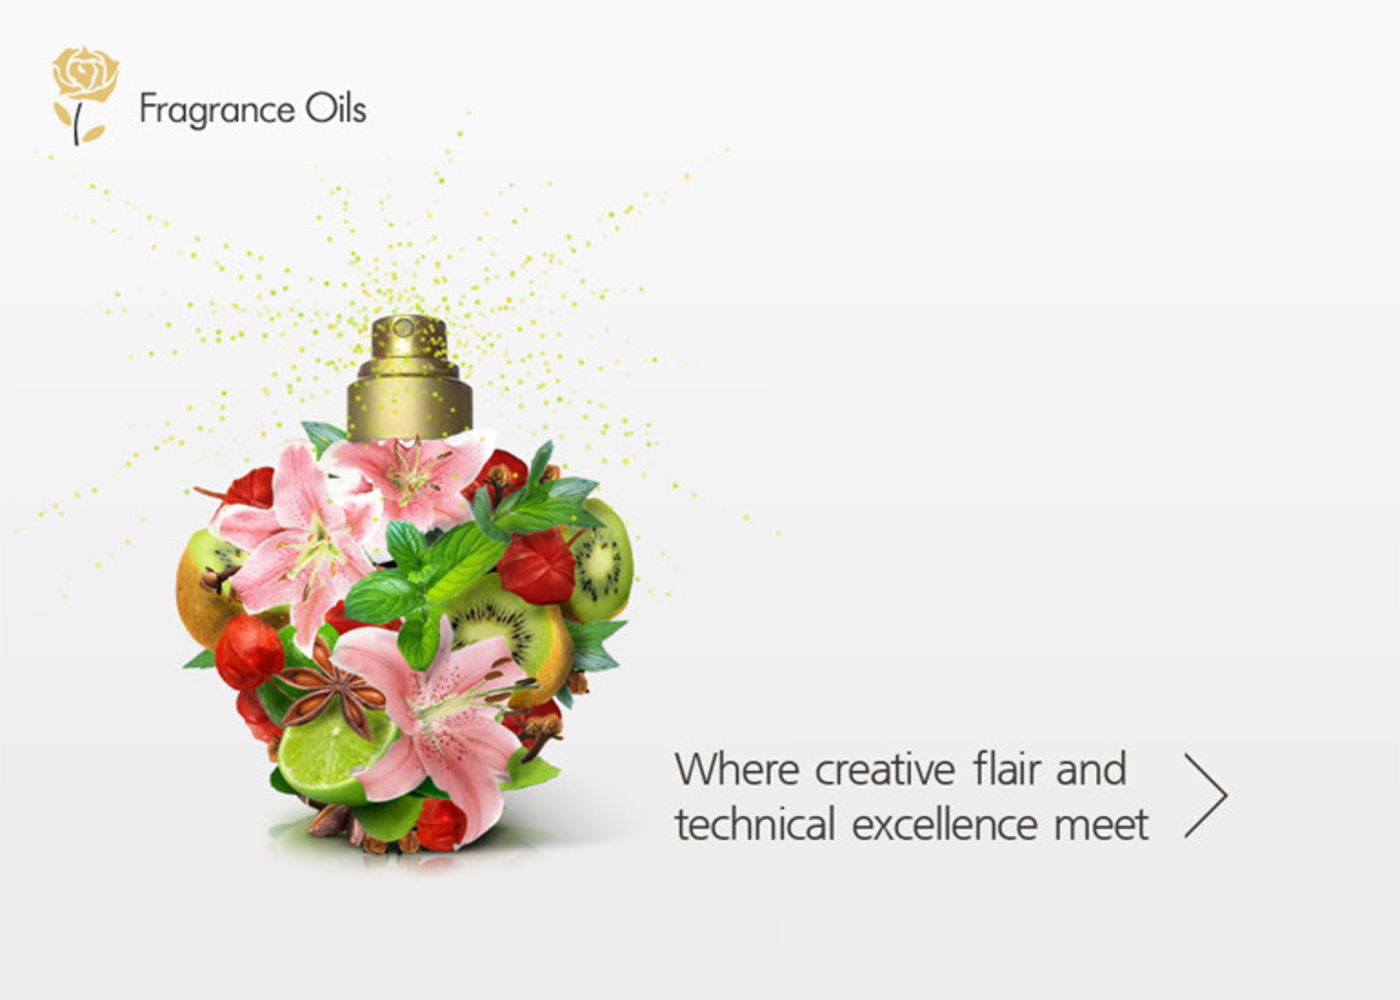 Fragrance Oils Welcome